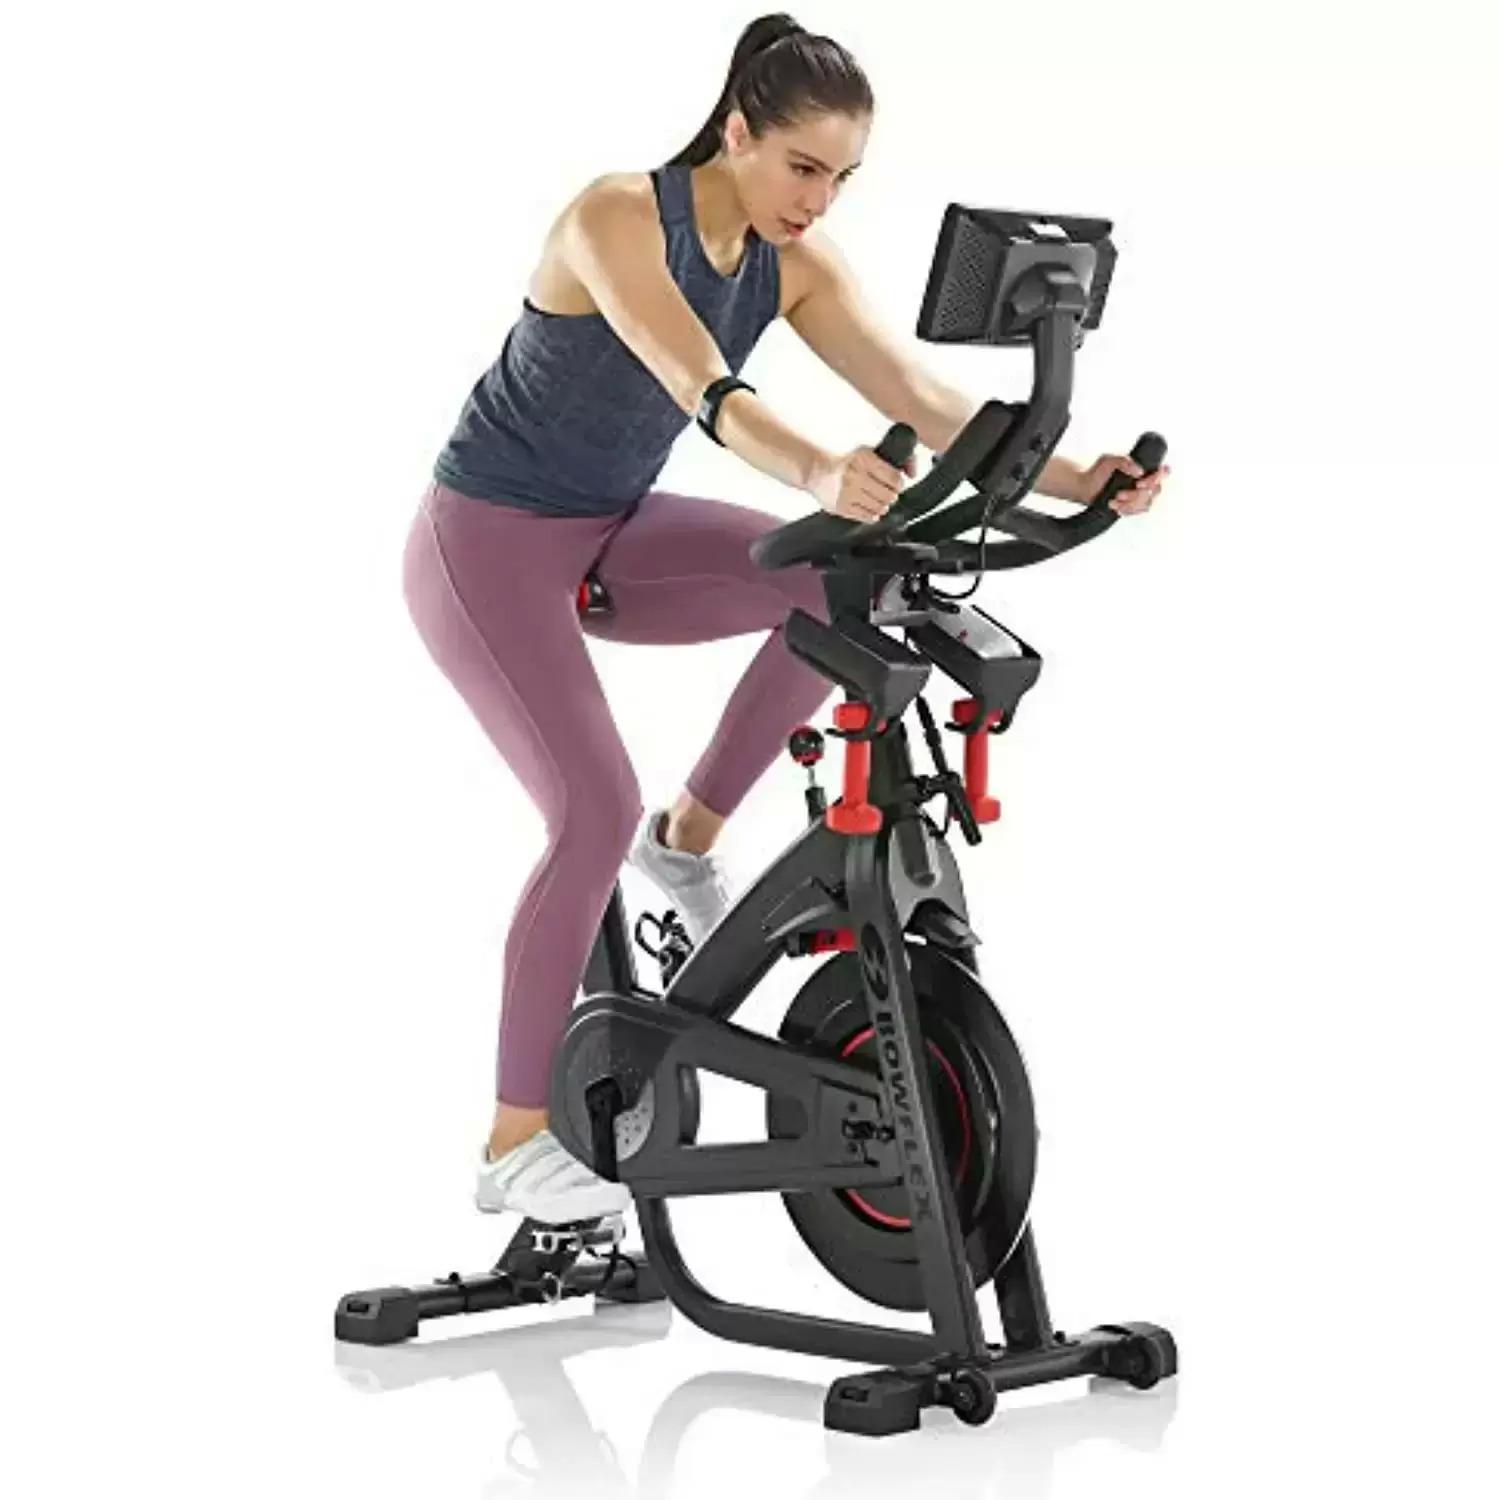 Bowflex C7 Indoor Cycling Exercise Bike for $499.99 Shipped